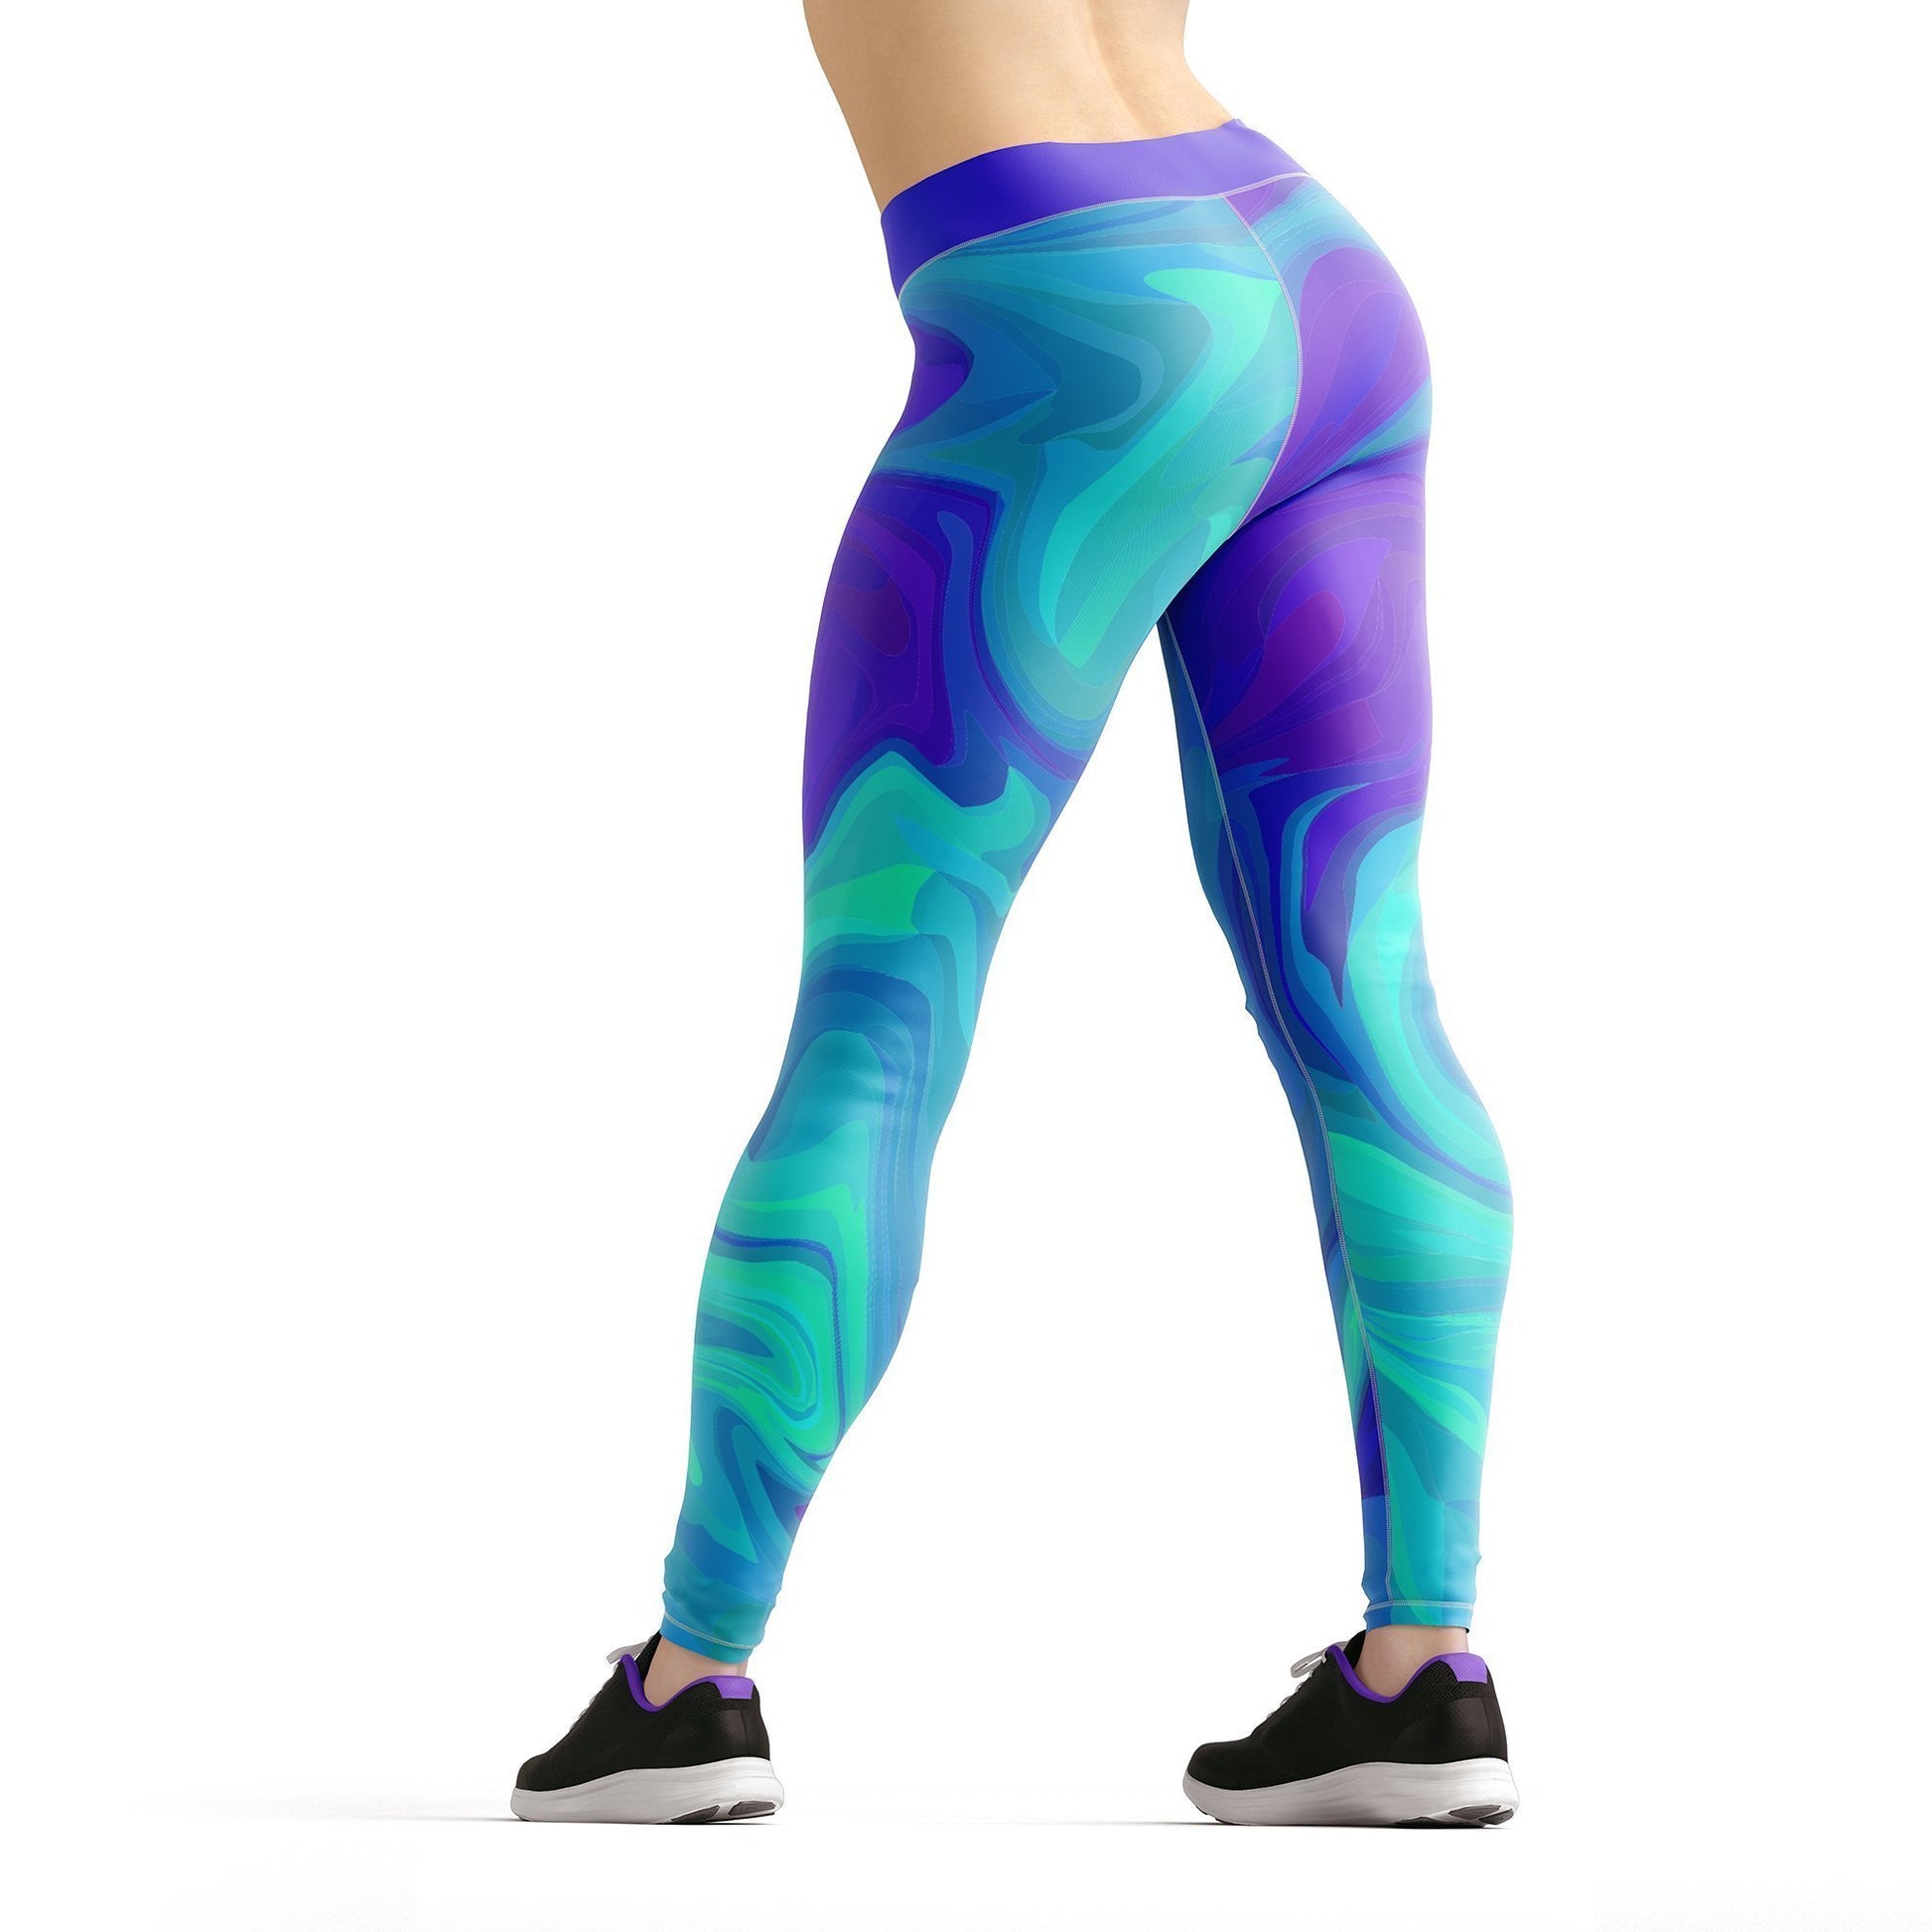 Breathable Serena leggings, designed for comfort and airflow to keep you cool during your activities.